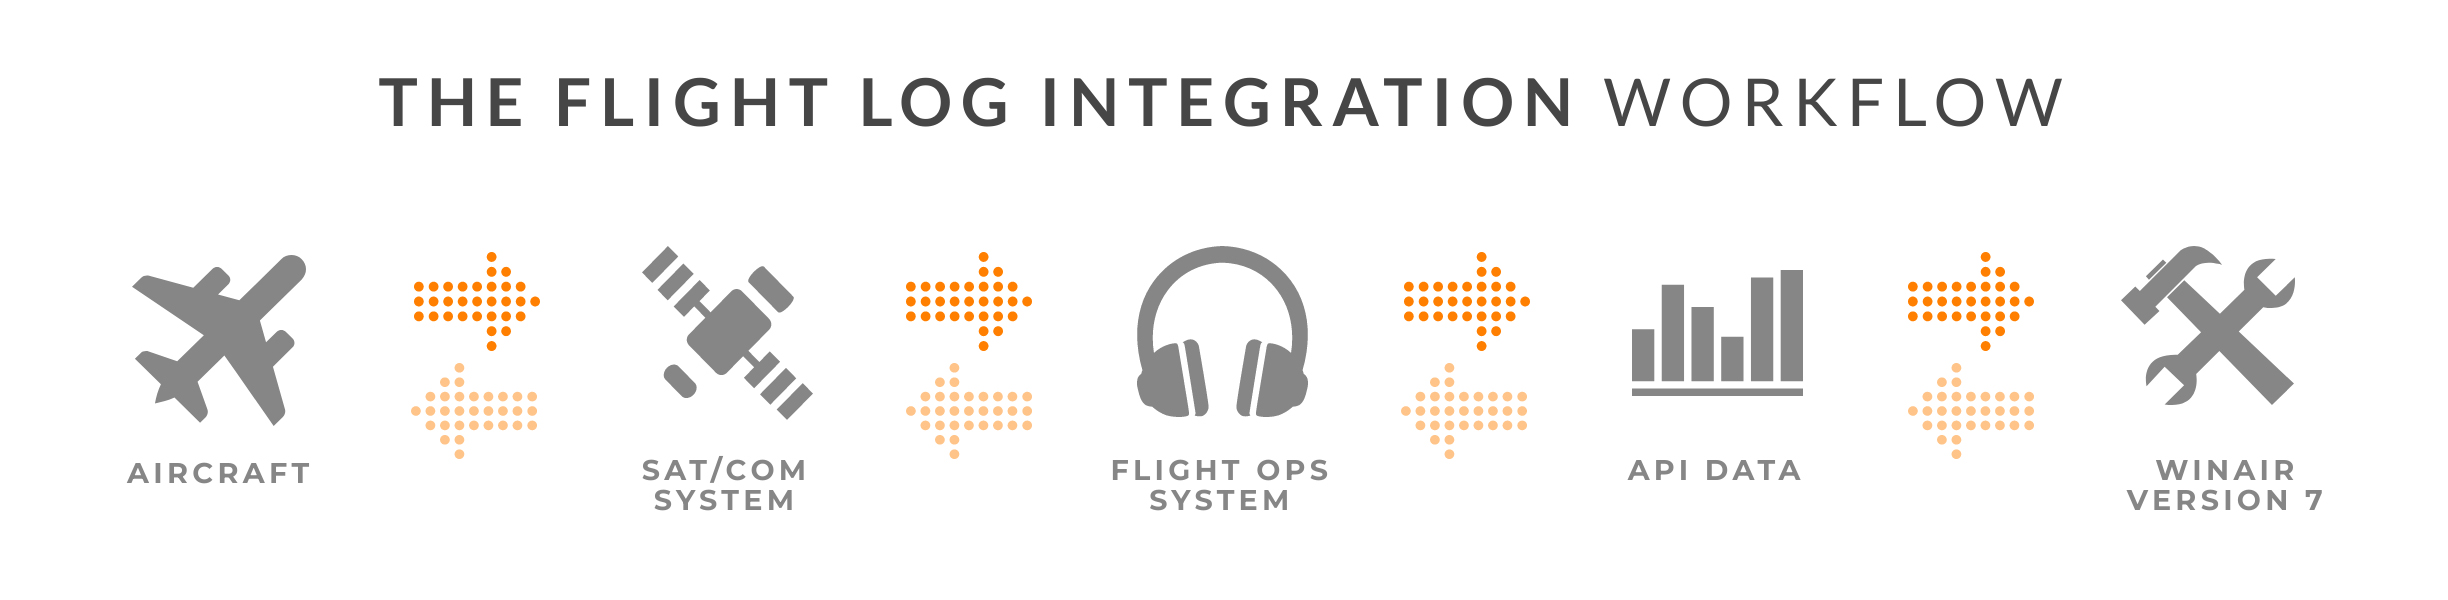 An overview of the workflow for WinAir’s Flight Log Integration for WinAir Version 7